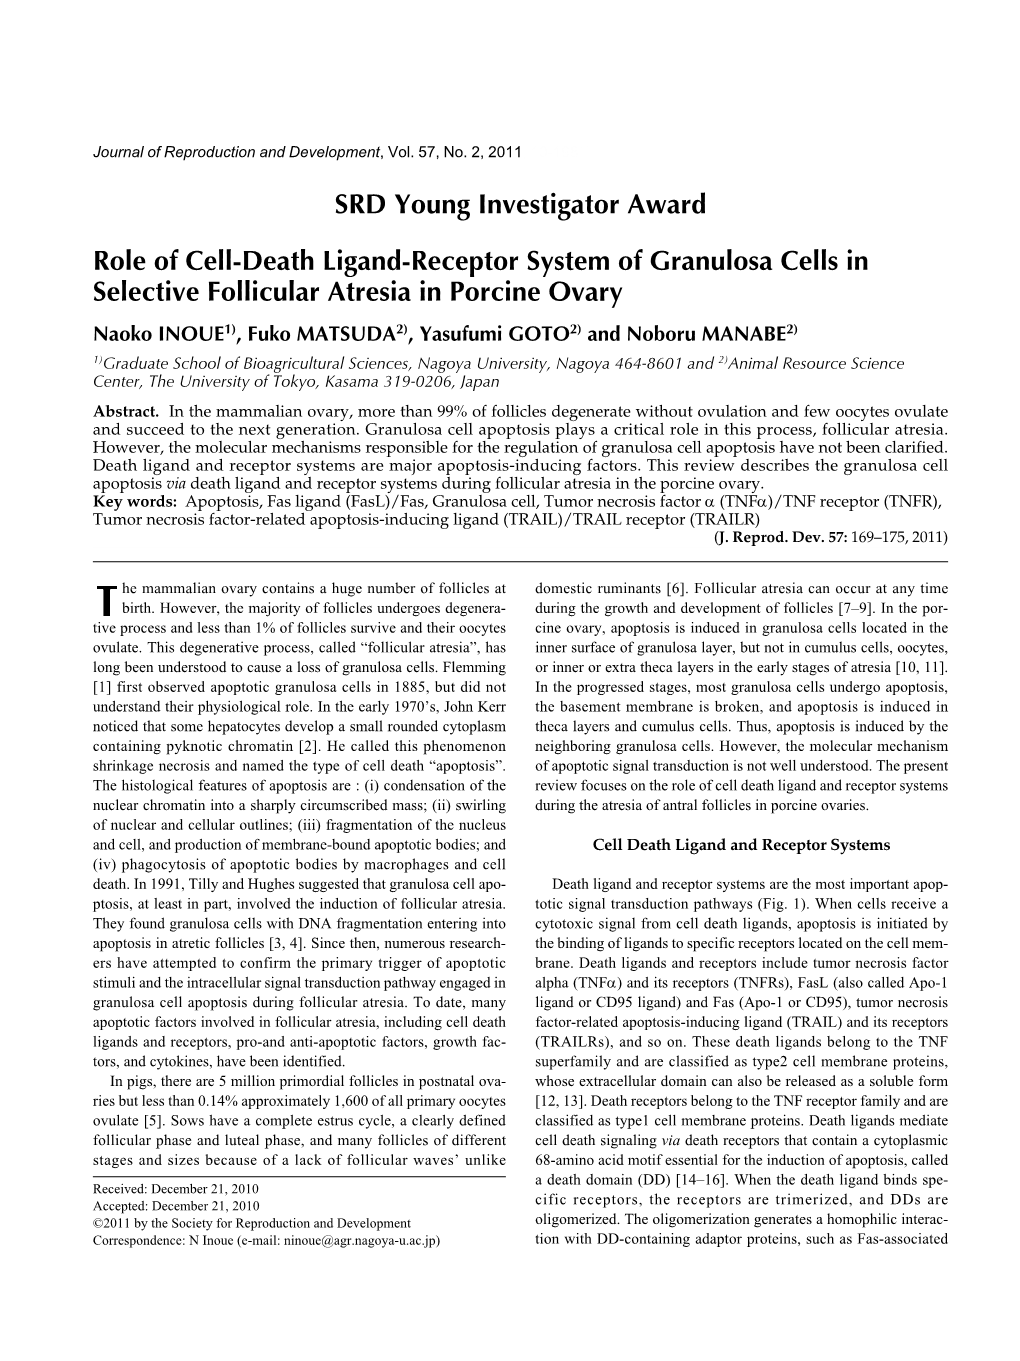 SRD Young Investigator Award Role of Cell-Death Ligand-Receptor System of Granulosa Cells in Selective Follicular Atresia In